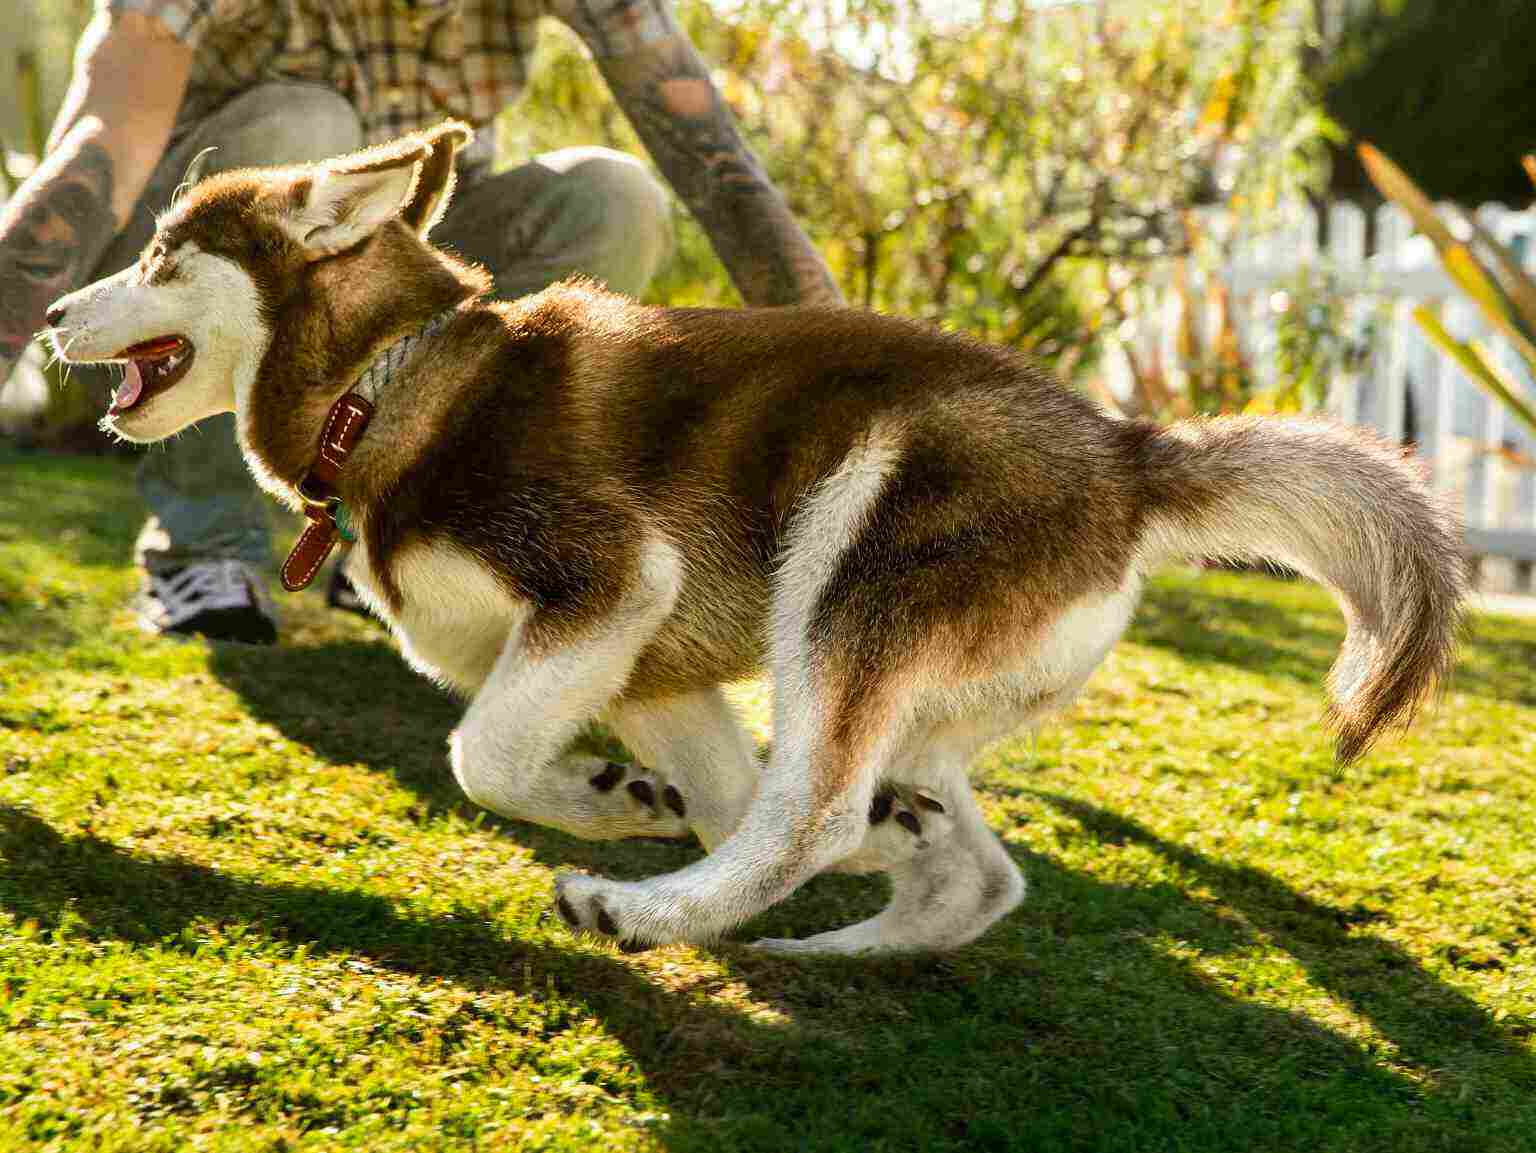 A husky puppy running in the yard and playing with its owner